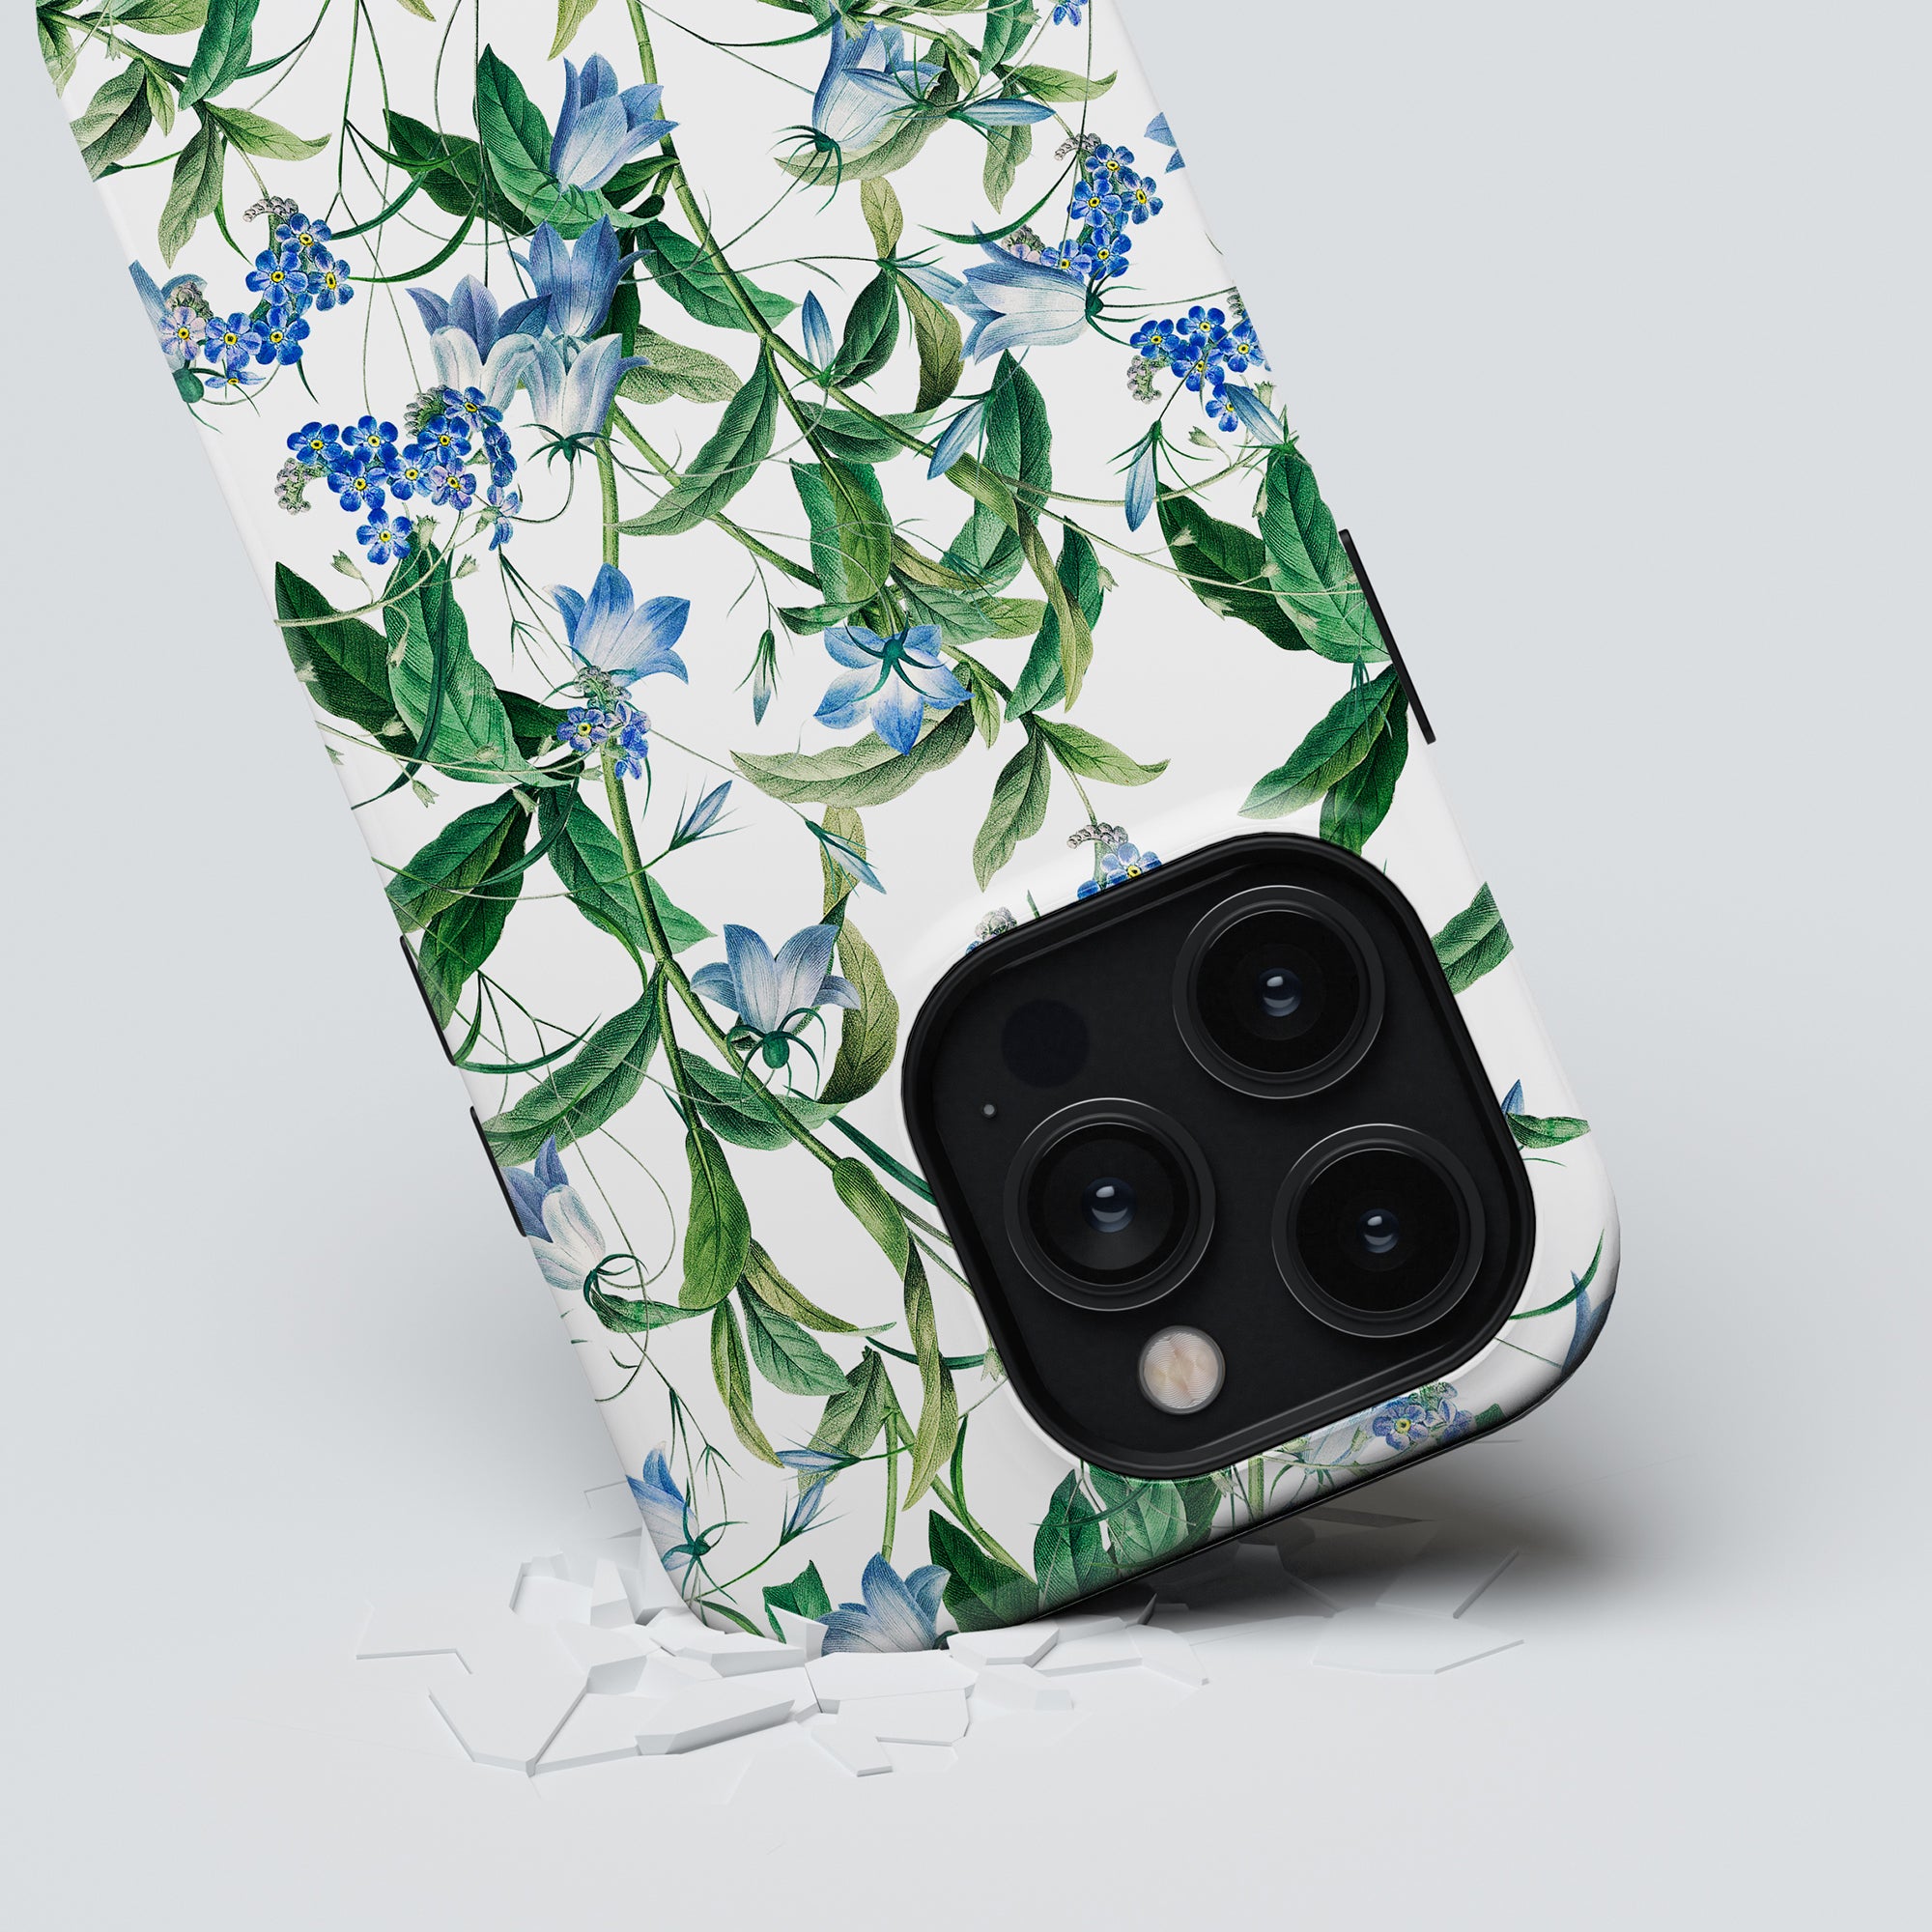 Modern smartphone with a Blue Bells - Tough Case peeling away to reveal camera lenses.